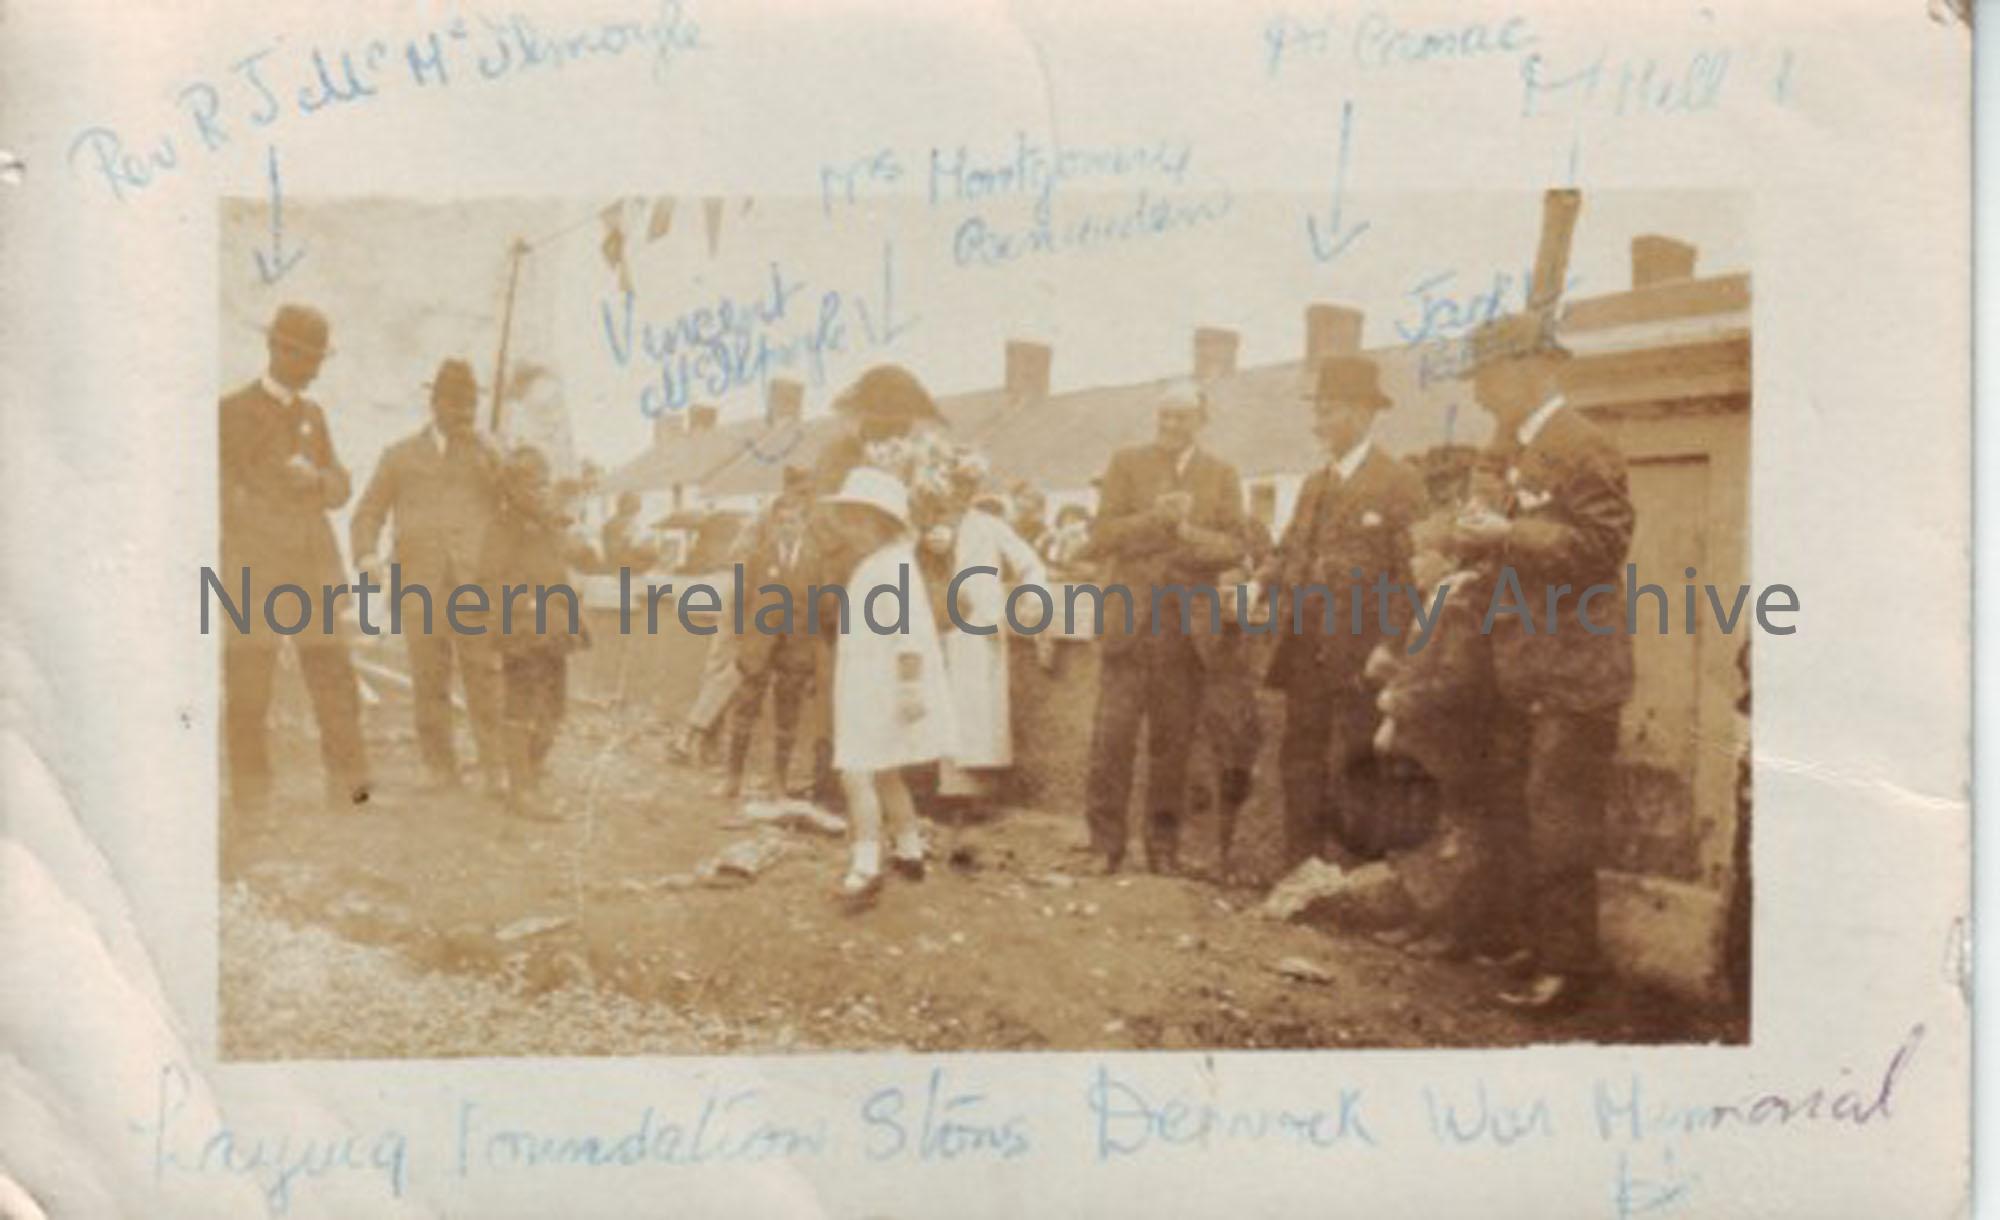 Laying foundation stone at Dervock War Memorial. Picture has names wrote on in pen, from left ot right Rev R J McIlmoyle, Vincent McIlmoyle, Mrs Montg…